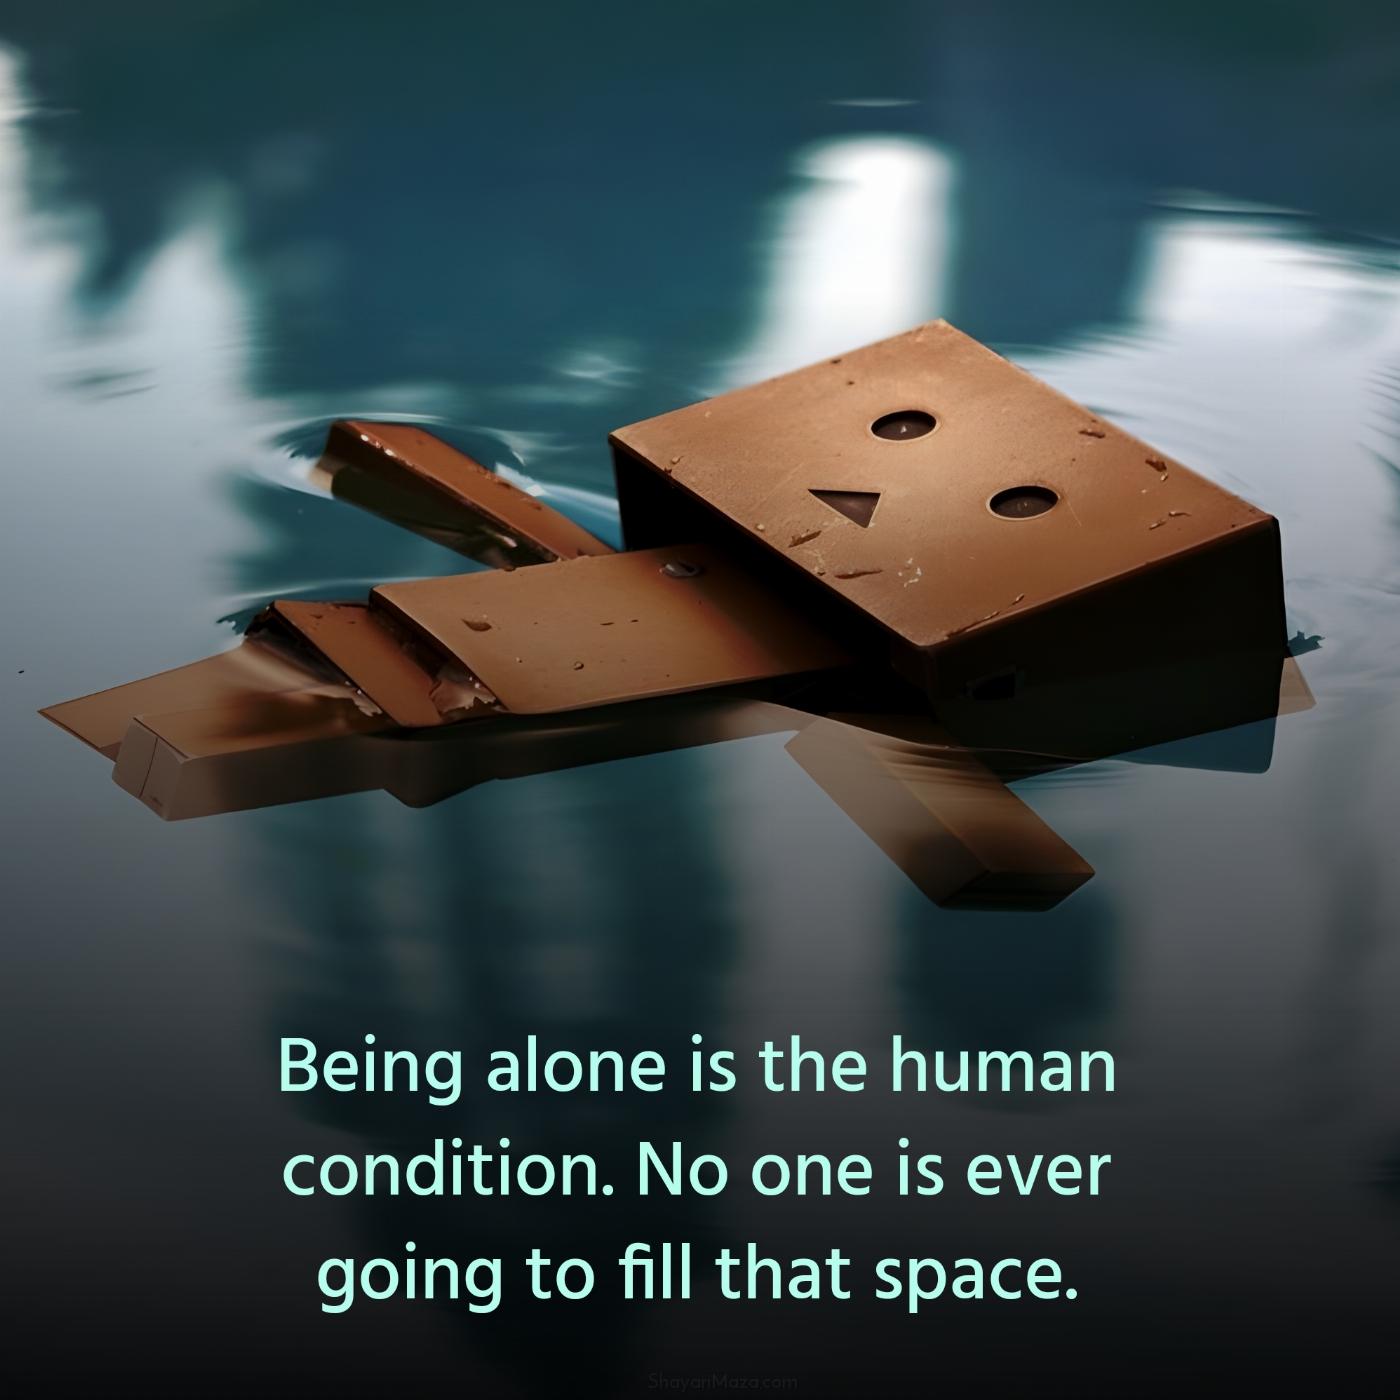 Being alone is the human condition